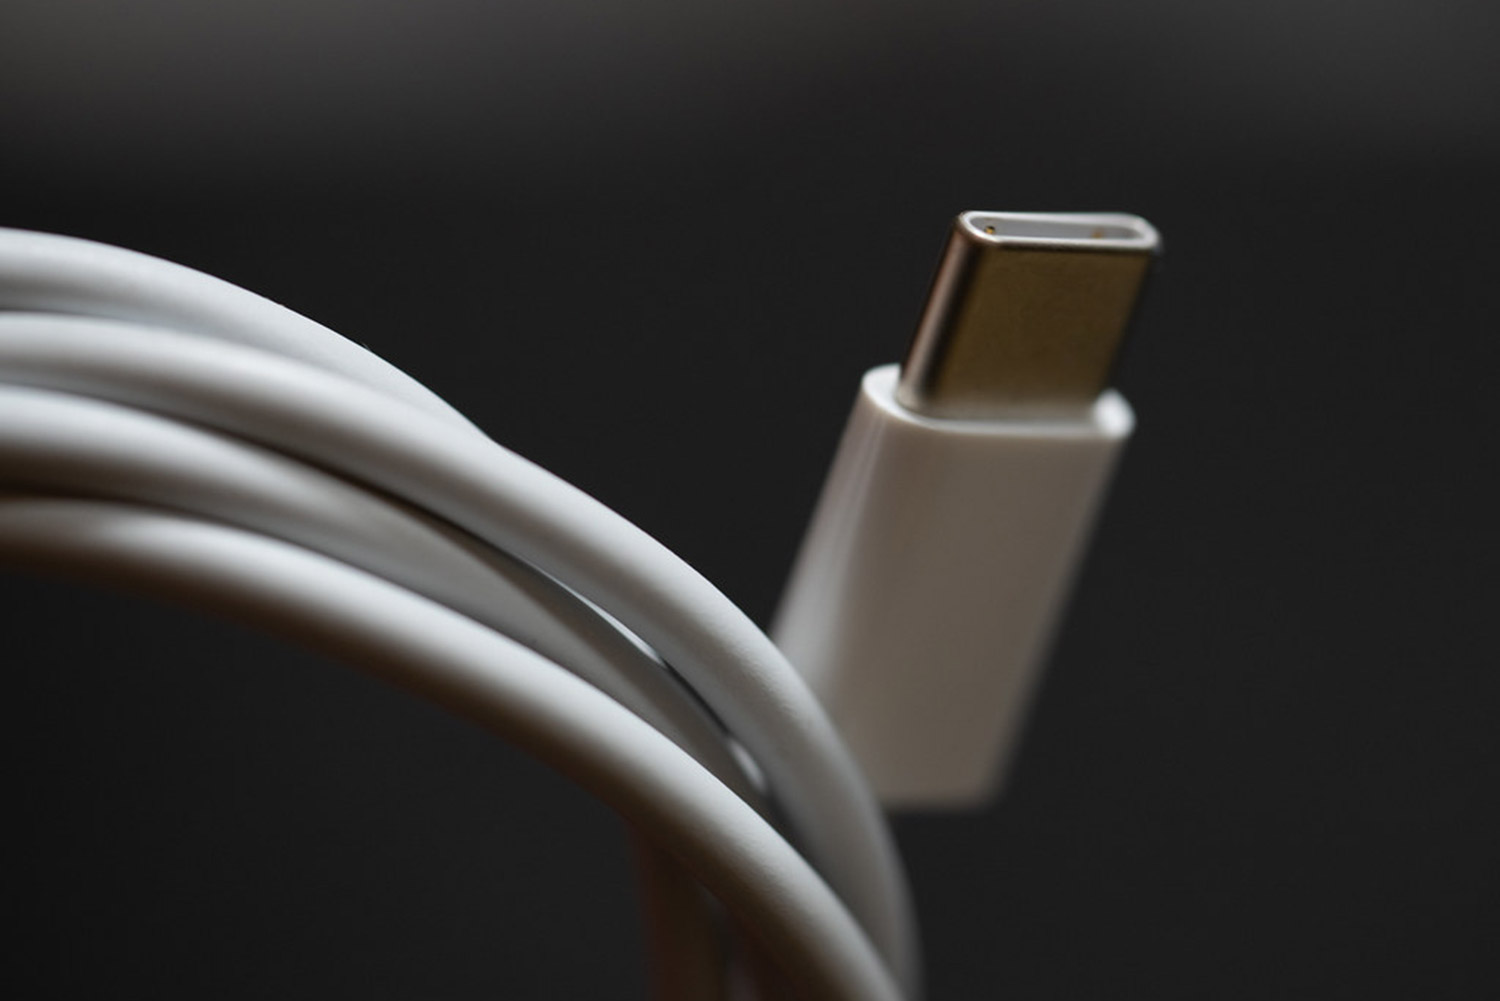 Close up detail photo of a USB charging cable for a smartphone or ipod